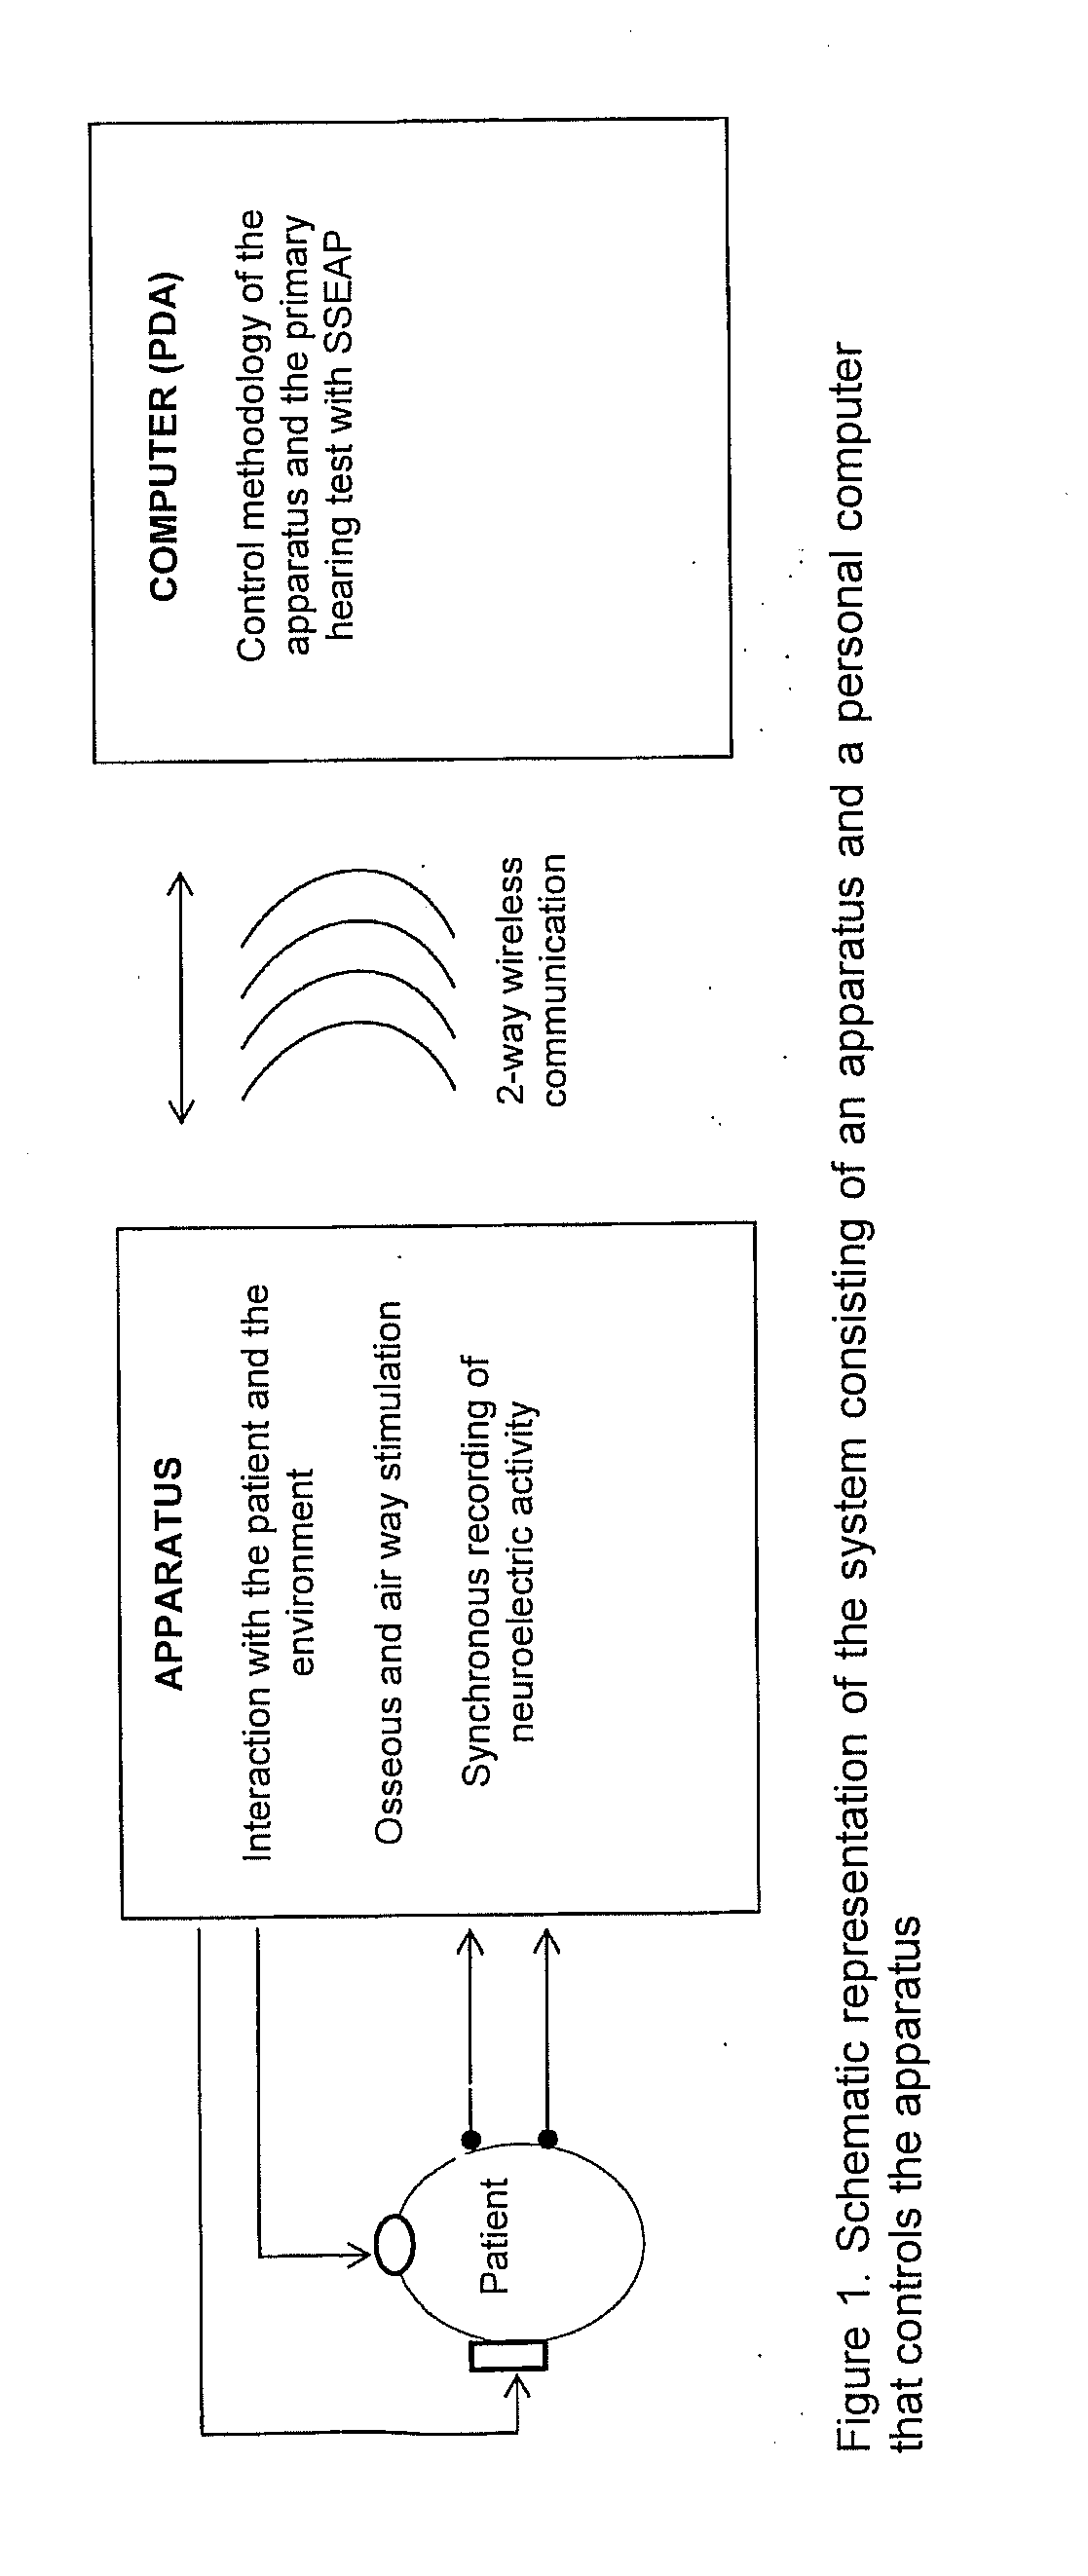 Method and Apparatus for the Objective Detection of Auditive Disorders